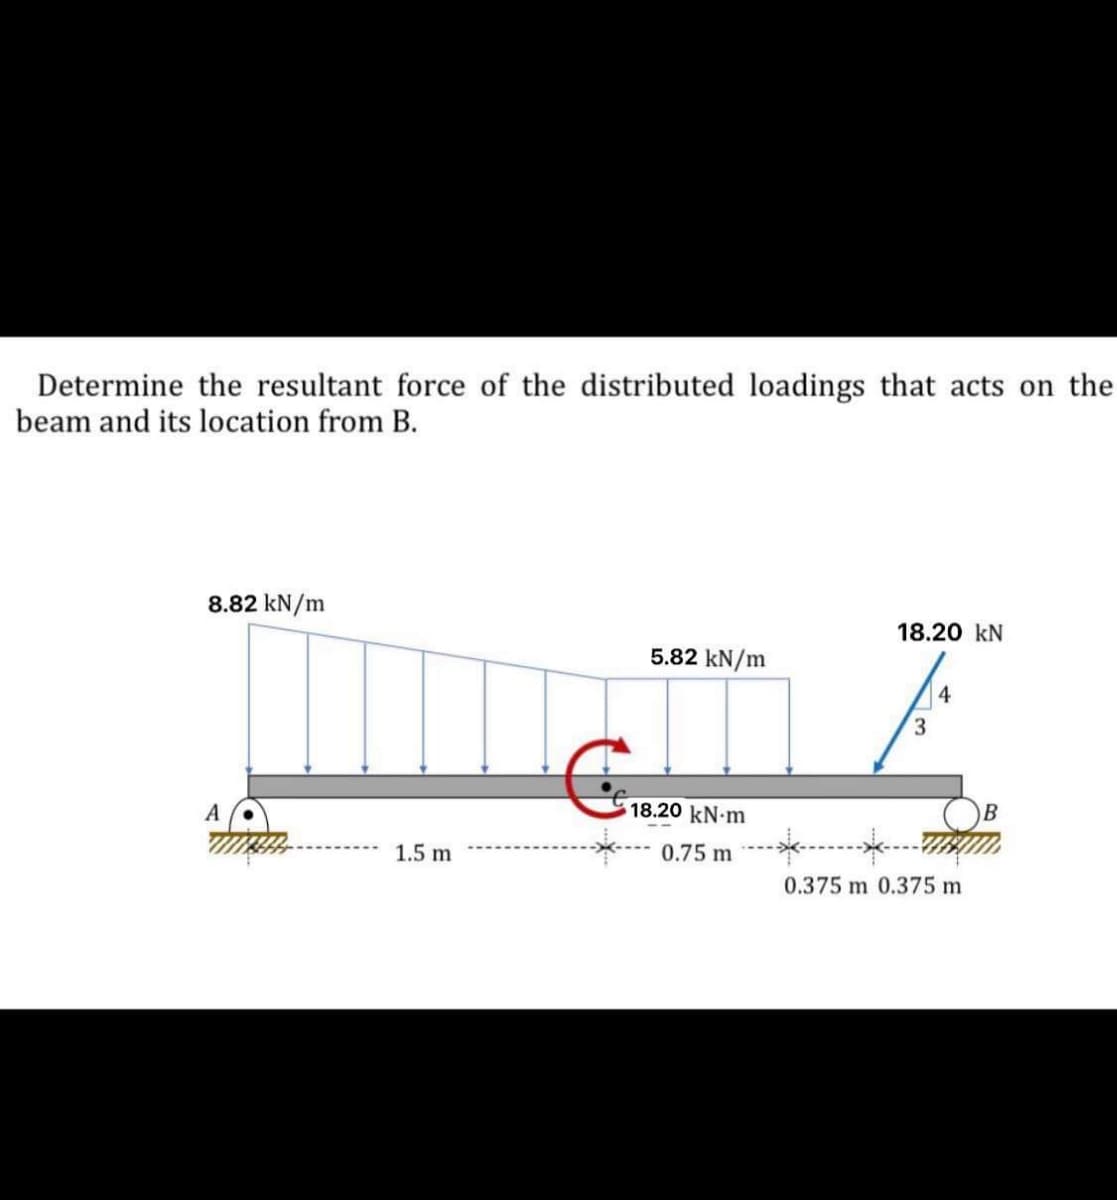 Determine the resultant force of the distributed loadings that acts on the
beam and its location from B.
8.82 kN/m
18.20 kN
5.82 kN/m
4
3.
18.20 kN-m
B
1.5 m
0.75 m
0.375 m 0.375 m
